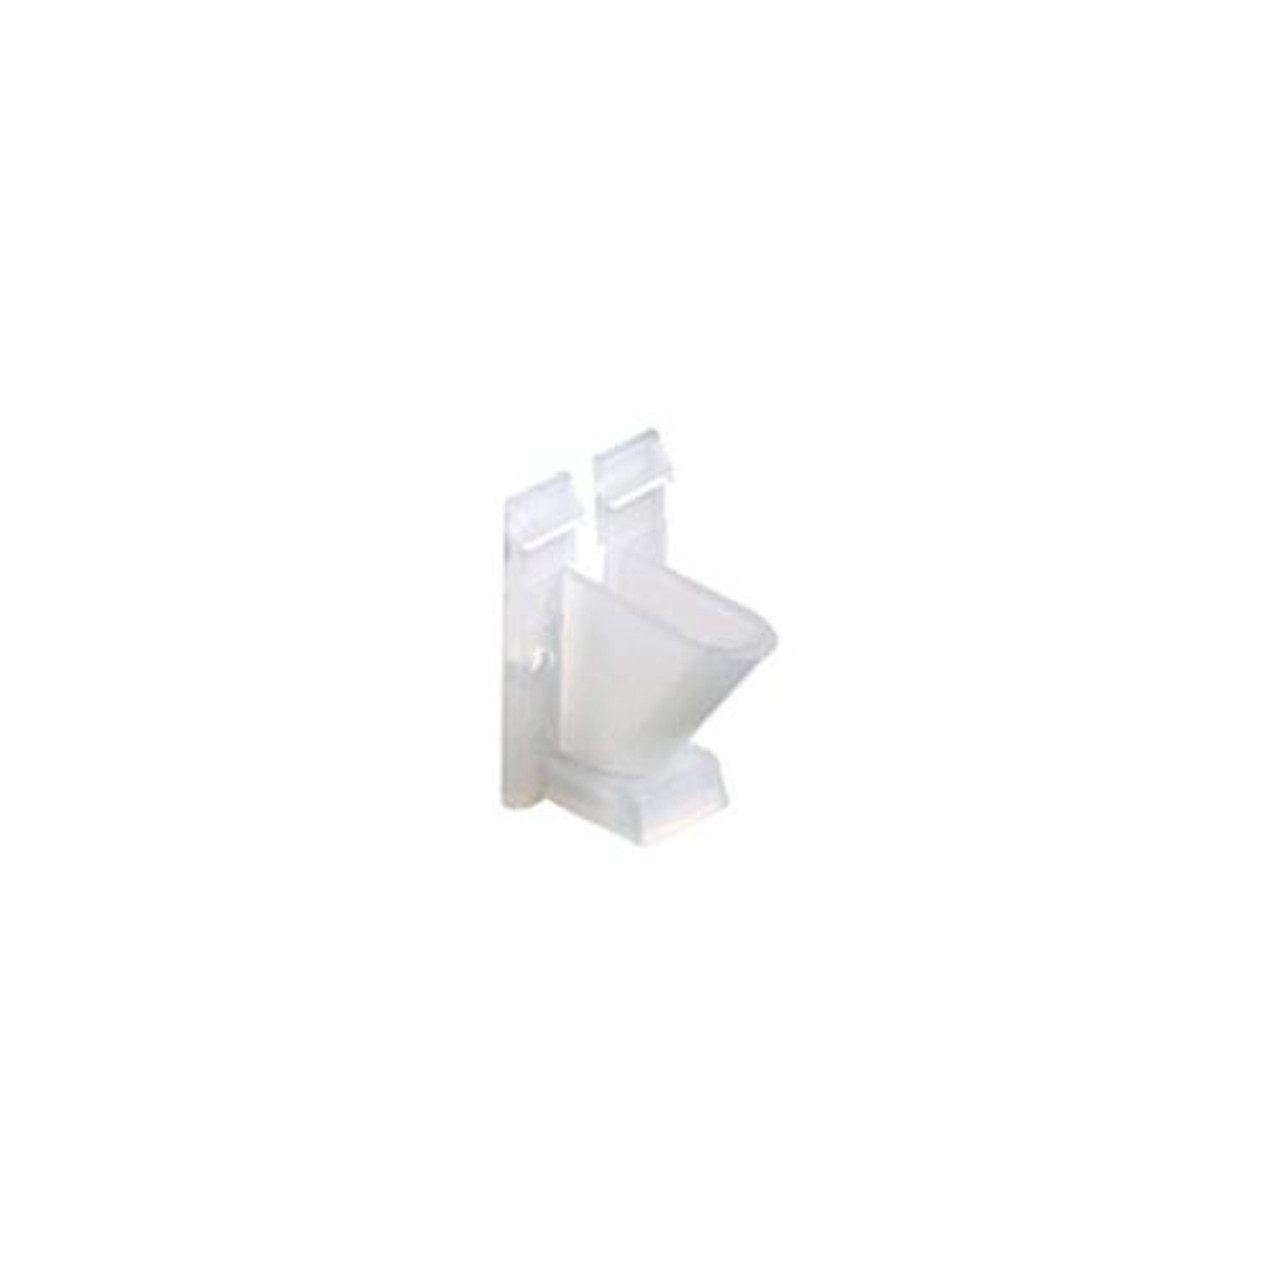 Steren 200-954CL Vertical Vinyl Siding Cable Clips 100 Pack Clear White Coaxial Home Exterior TV Video Signal Coaxial Line Aluminum Snap-In Support Fastener RG59 RG6, Part # 200954-CL